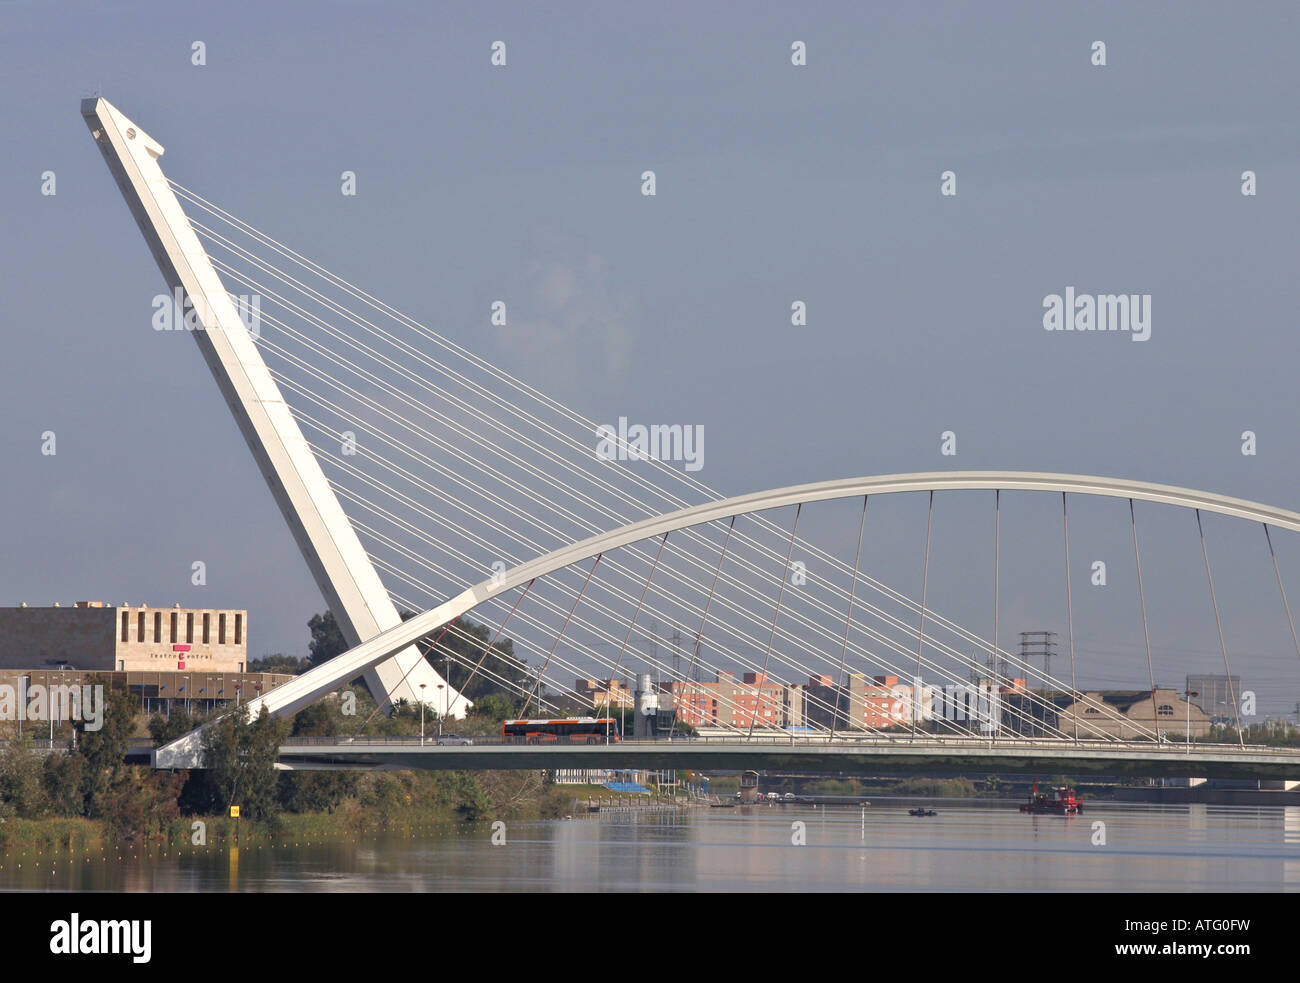 High Strung Overlapping Seville Bridges. Two modern bridges over the Meandro San Jeronimo River join to make a sculptural form Stock Photo